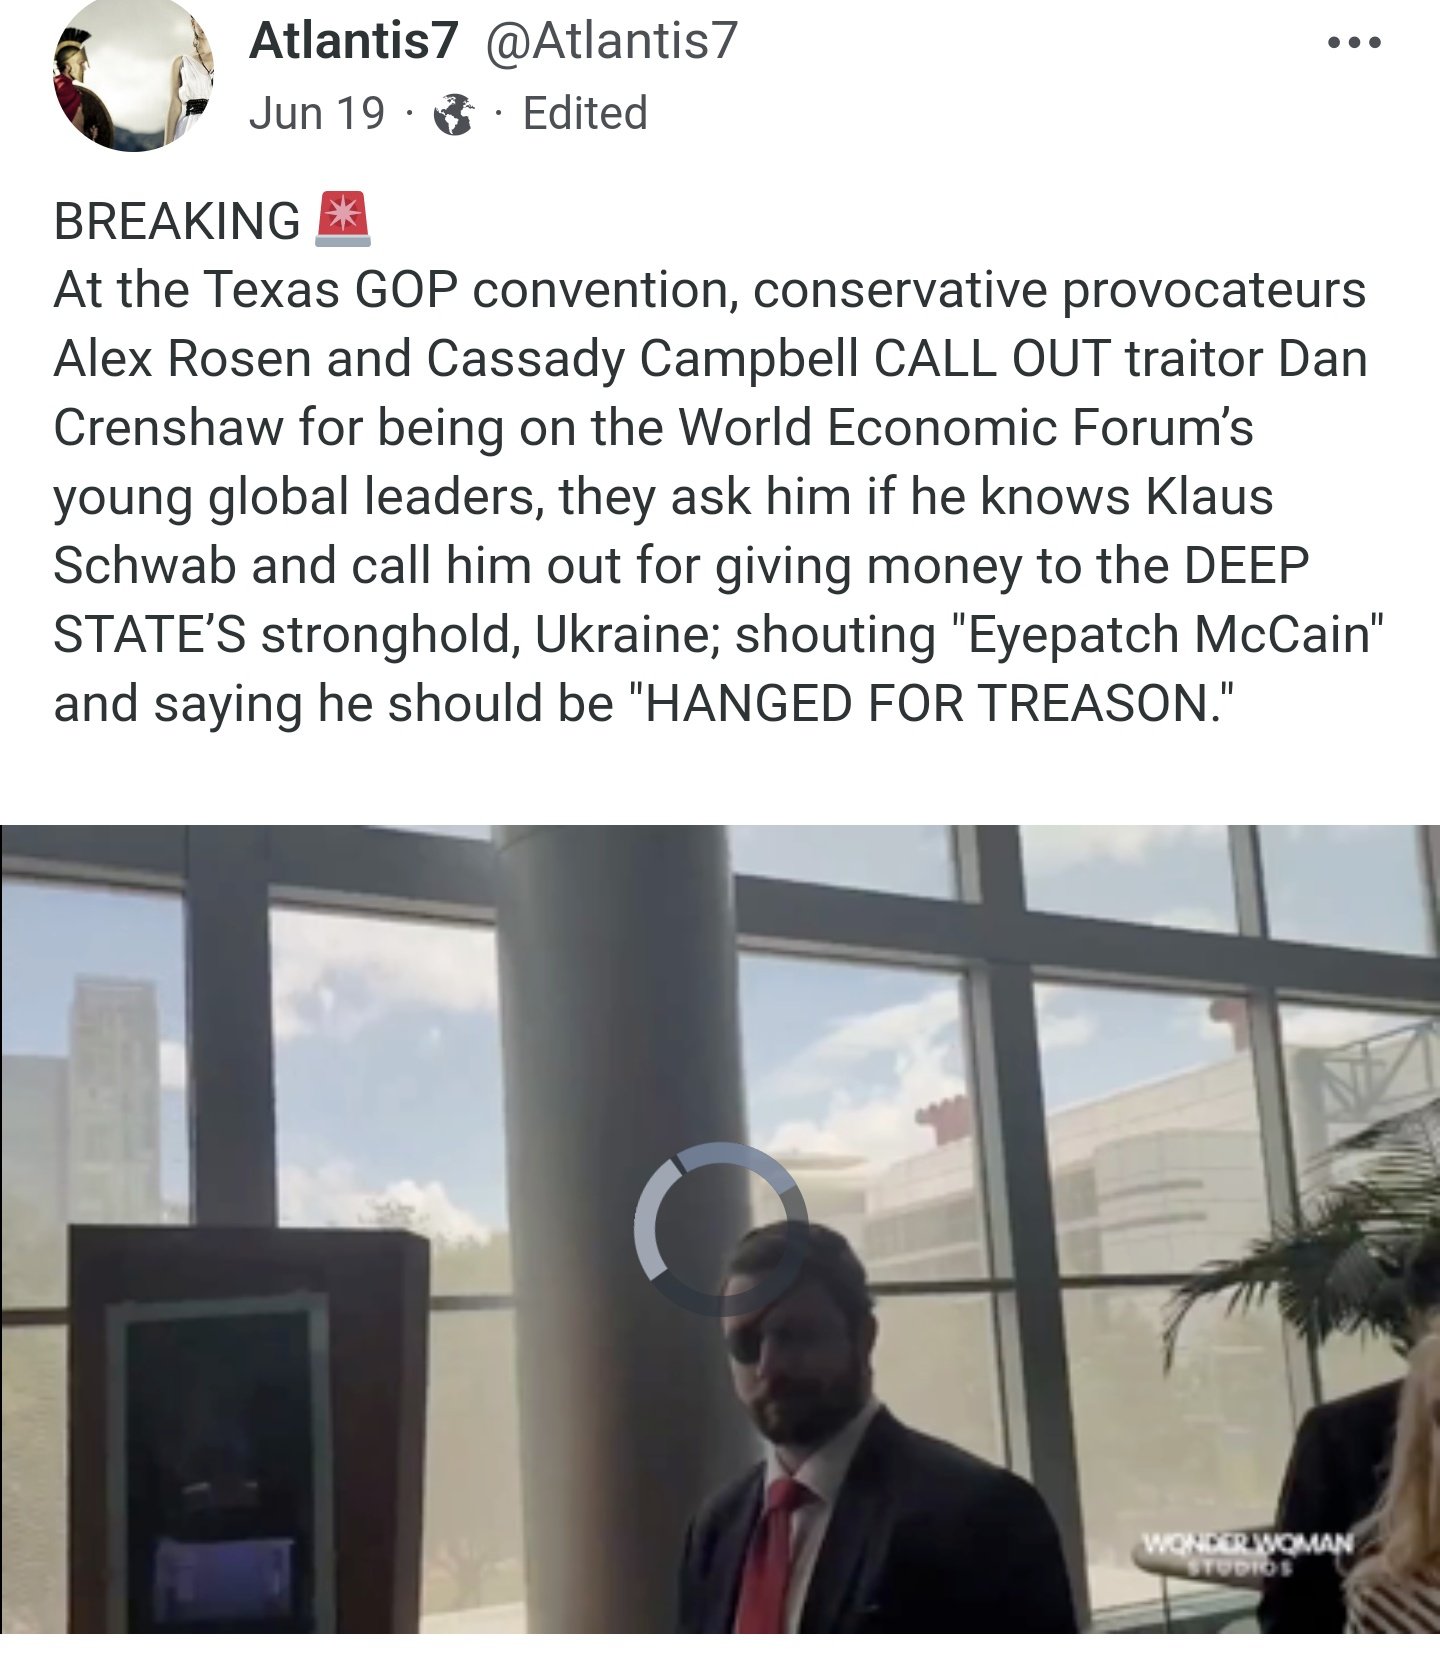 steven monacelli on X: @nickmartin Fascinating that this happened after it  already happened to his associate Chet Goldstein aka Alex Rosen, who was  with Cassady when they harassed Dan Crenshaw  /